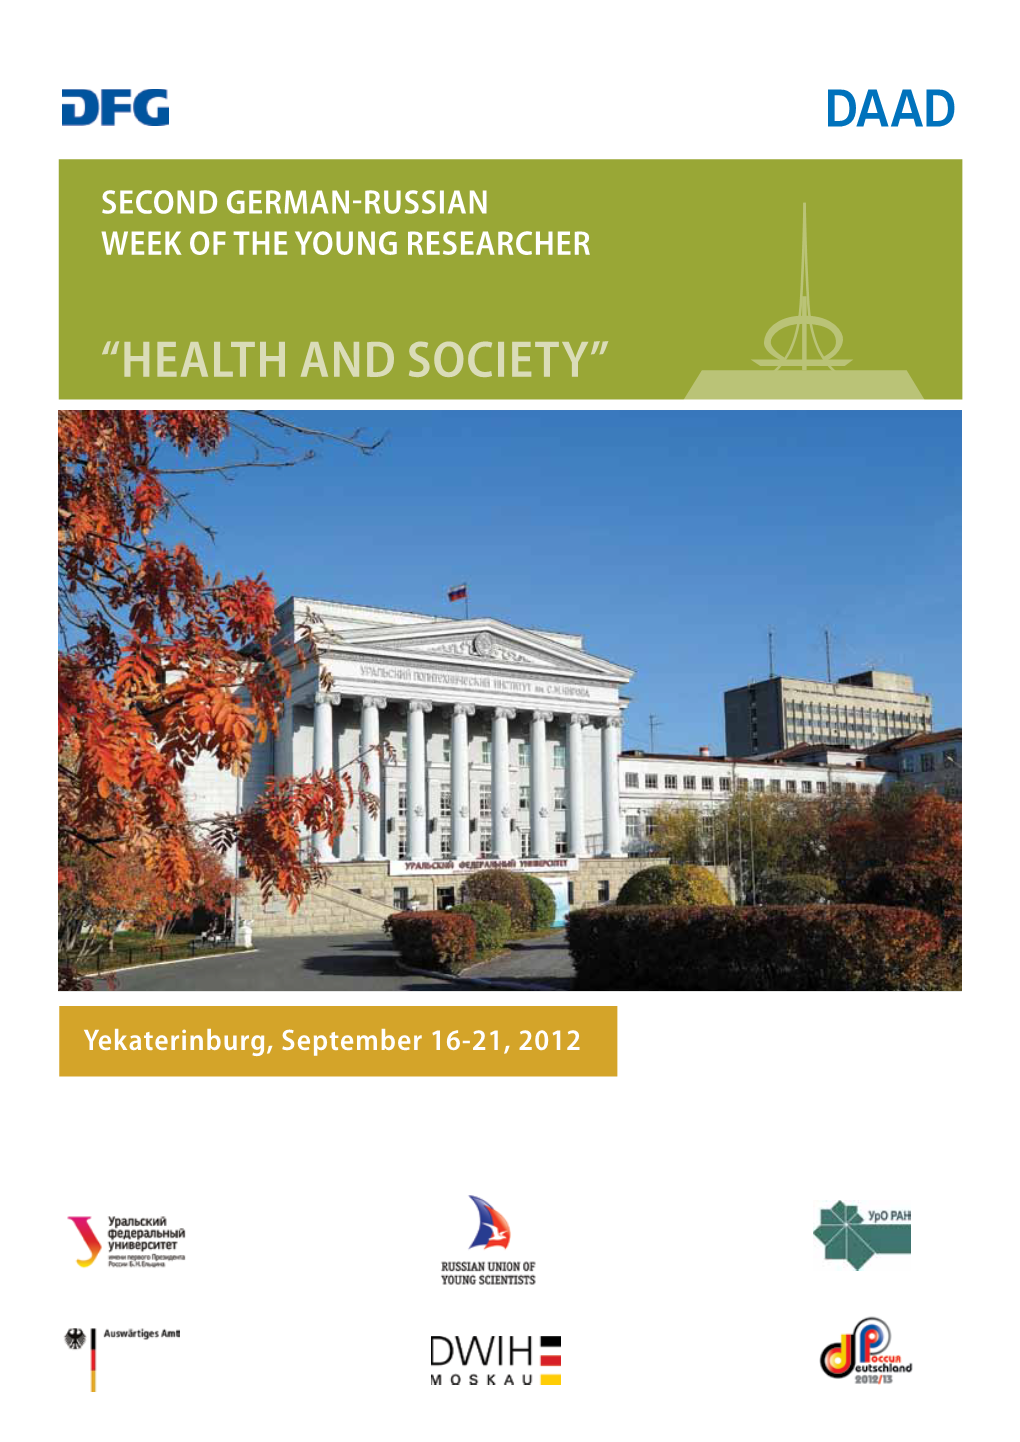 The Second German-Russian Week of Young Researcher